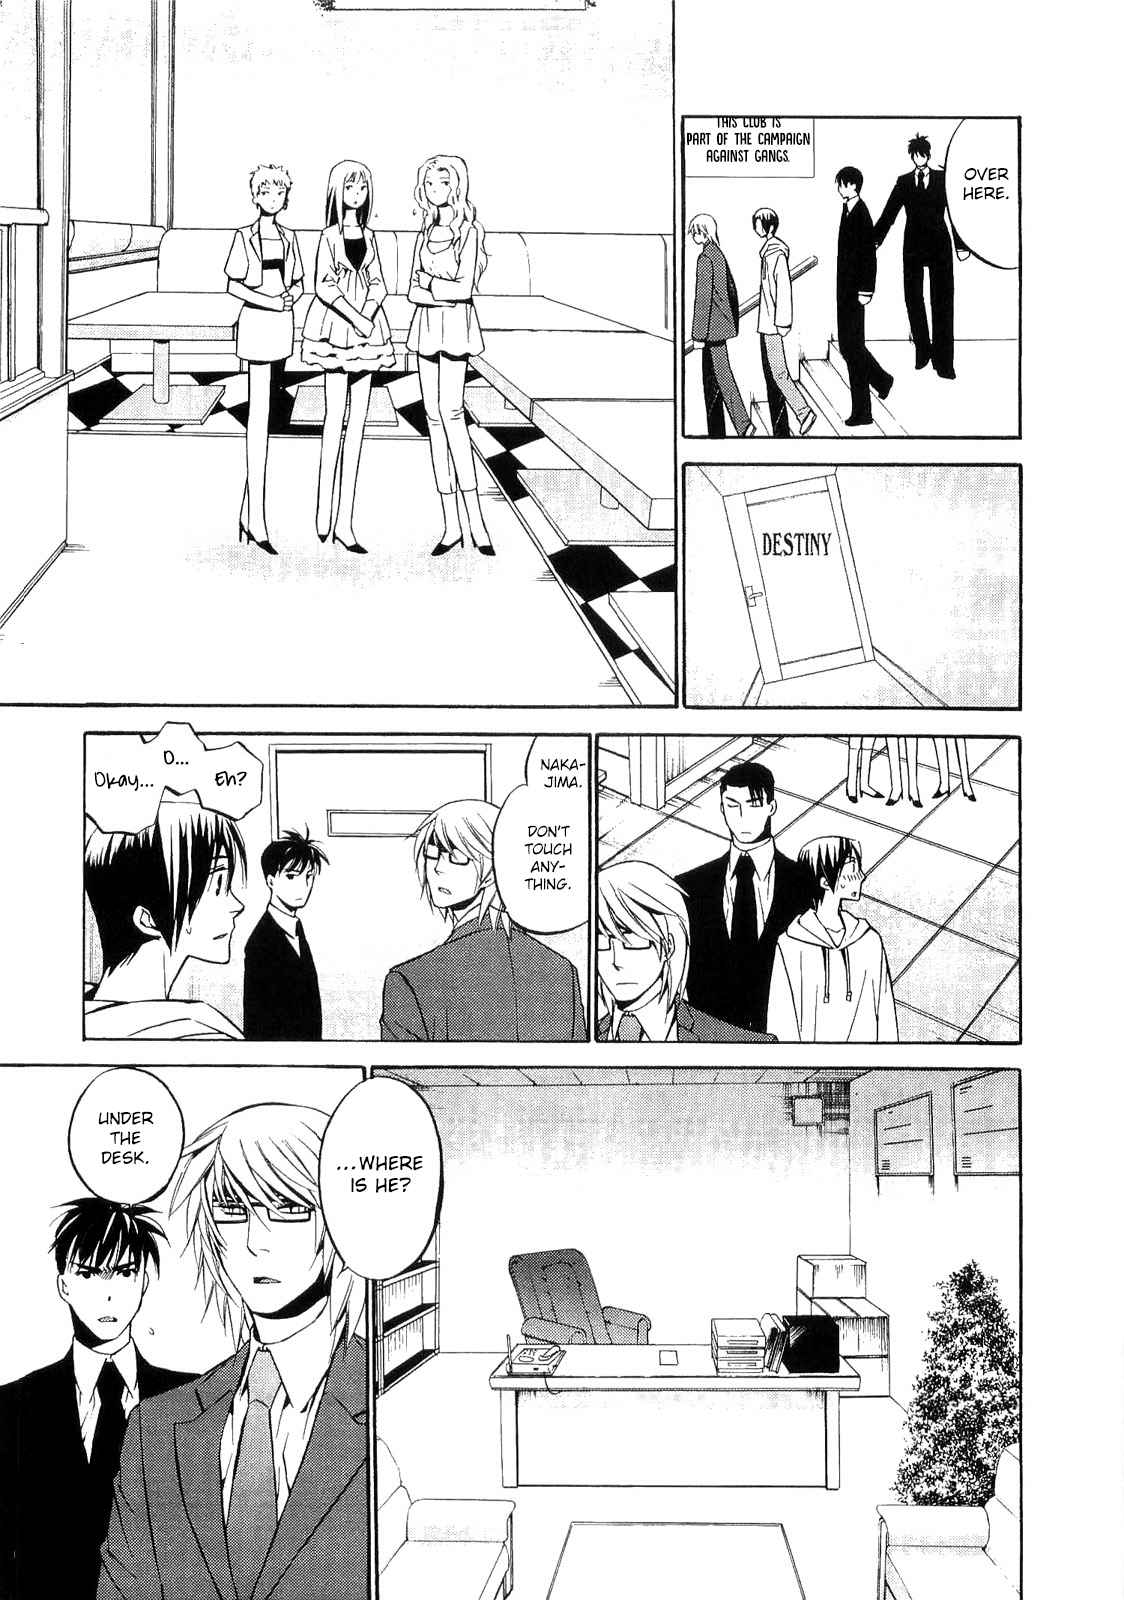 893 Ways to Become a Detective Vol. 3 Ch. 17 The Gun 1